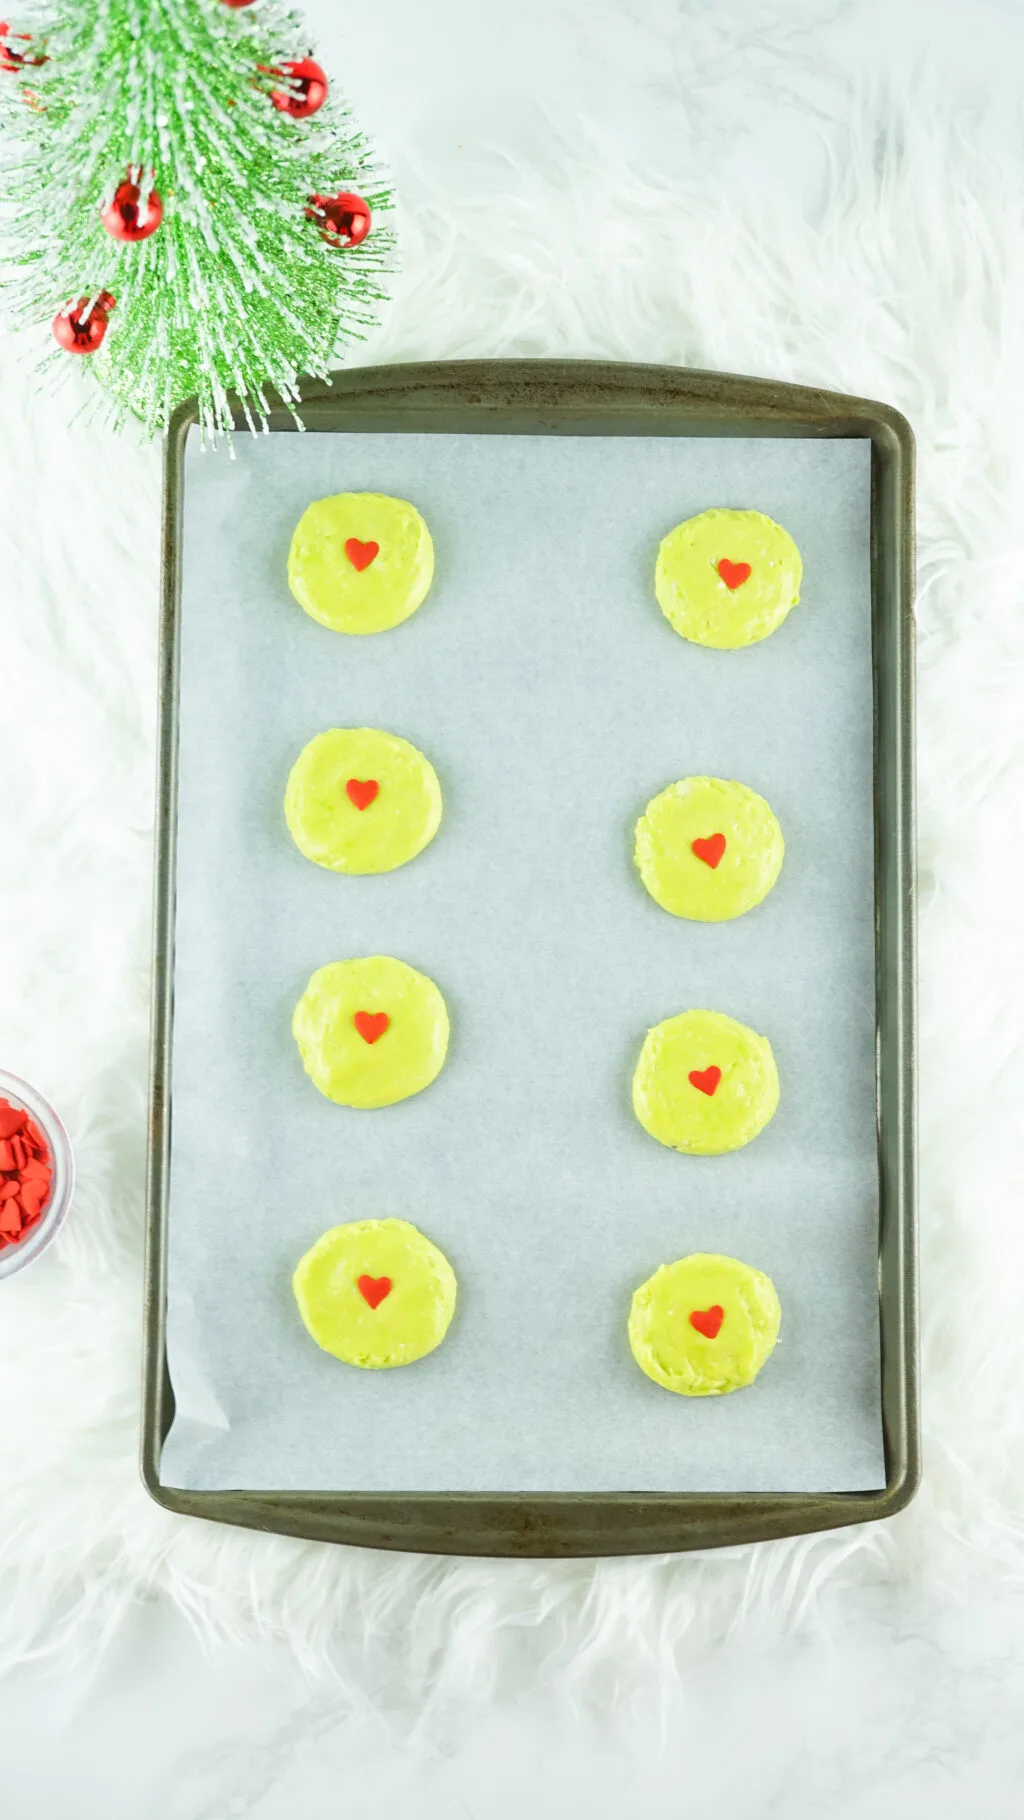 green cookie dough with red heart sprinkles on a baking sheet